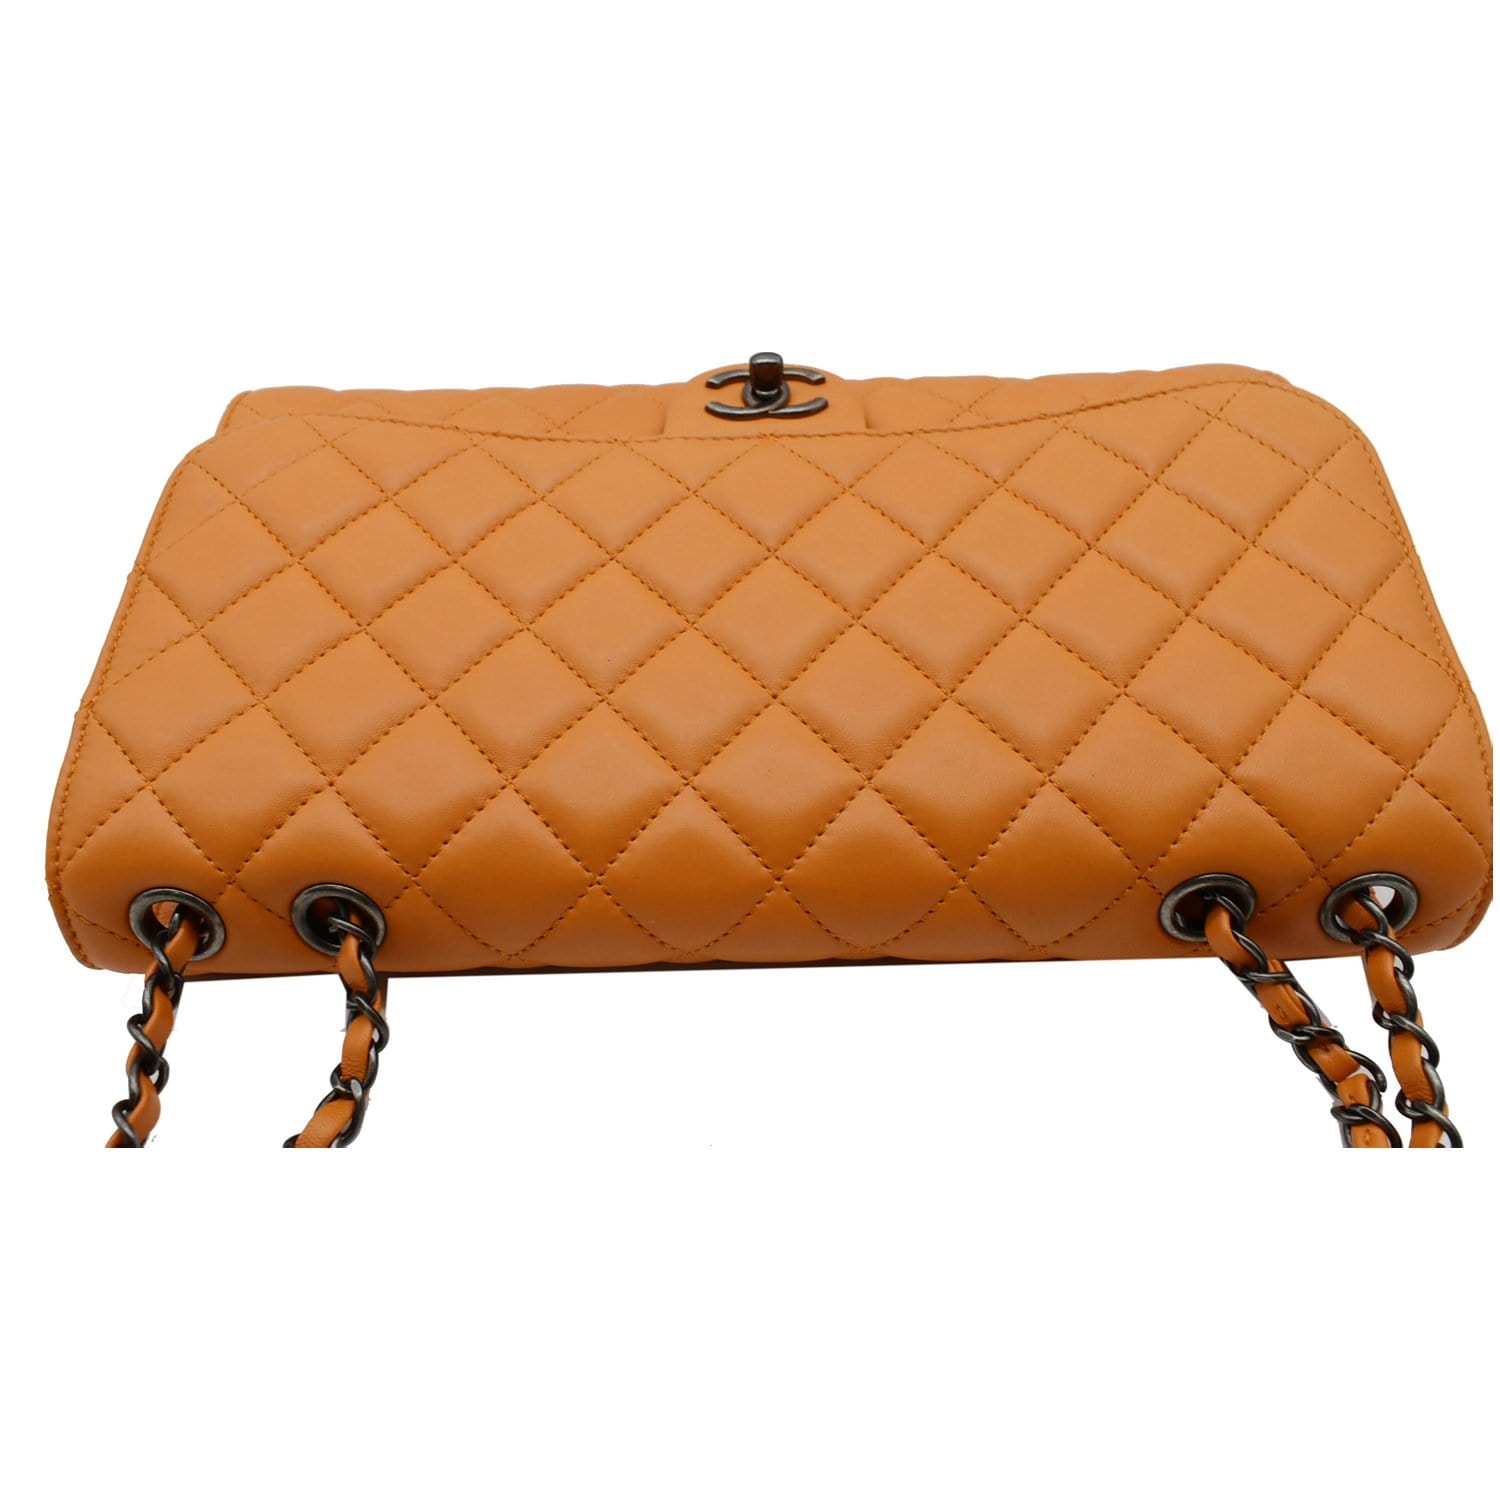 Chanel Orange Quilted Lambskin Medium Classic Double Flap Bag